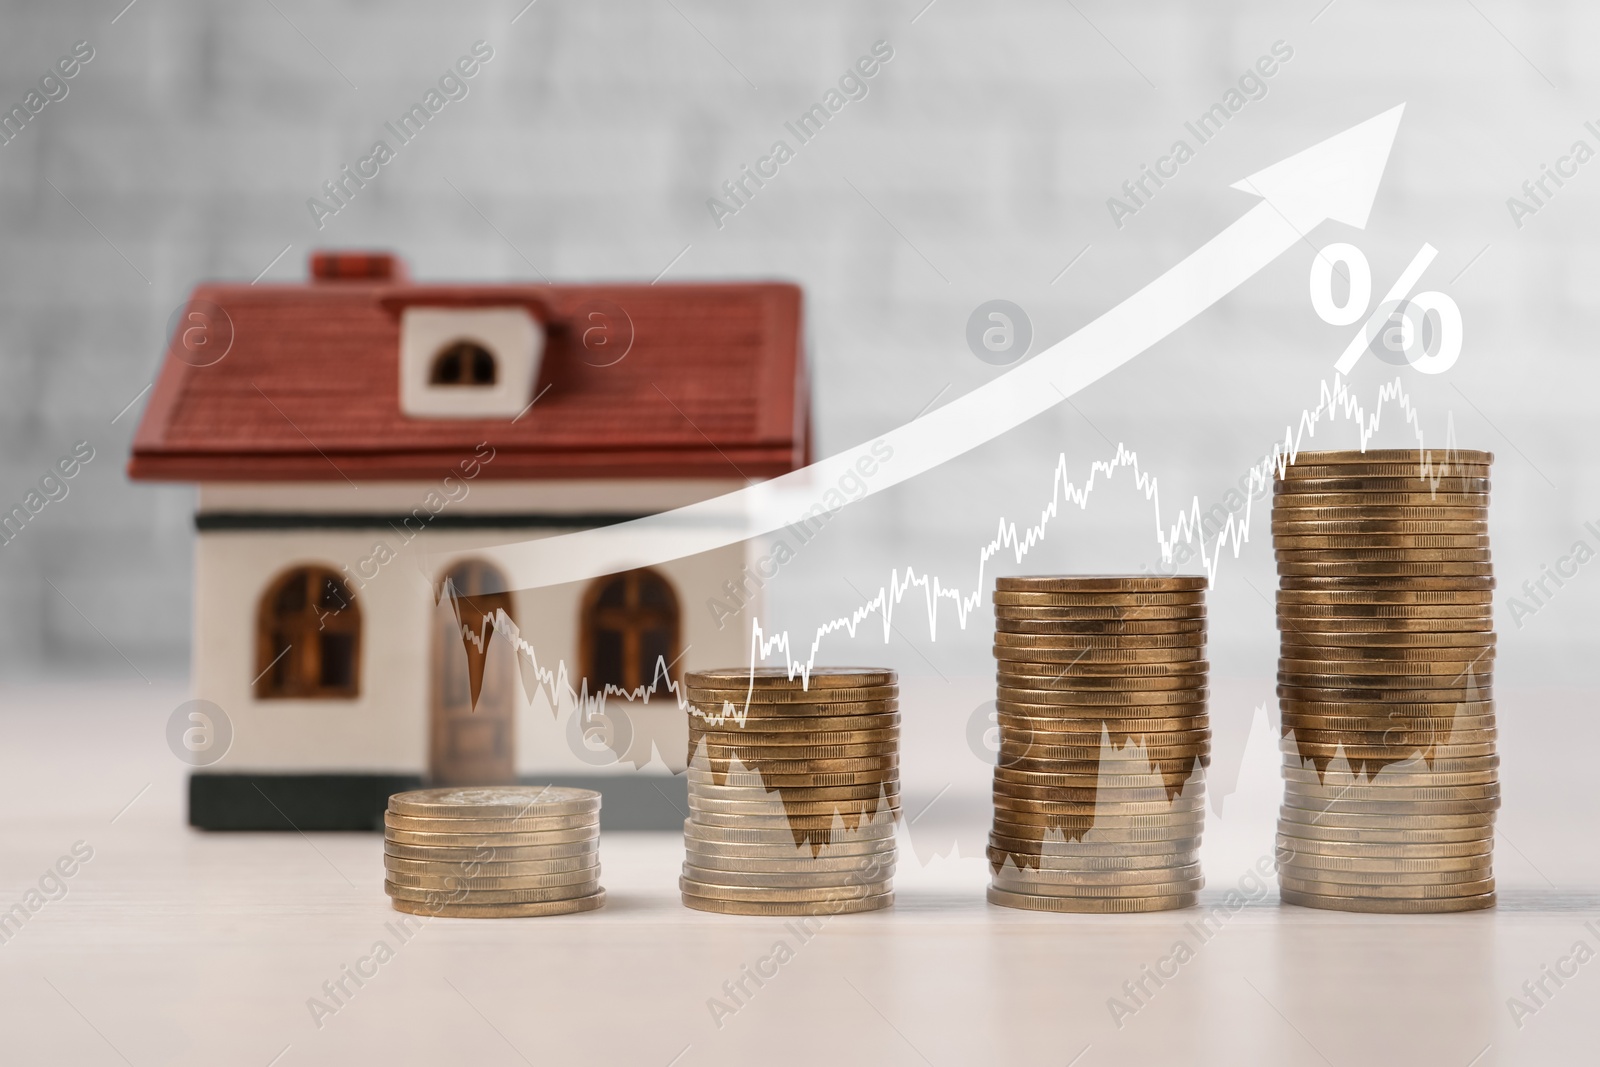 Image of Mortgage rate. Model of house, stacked coins, graphs, percent sign and arrow